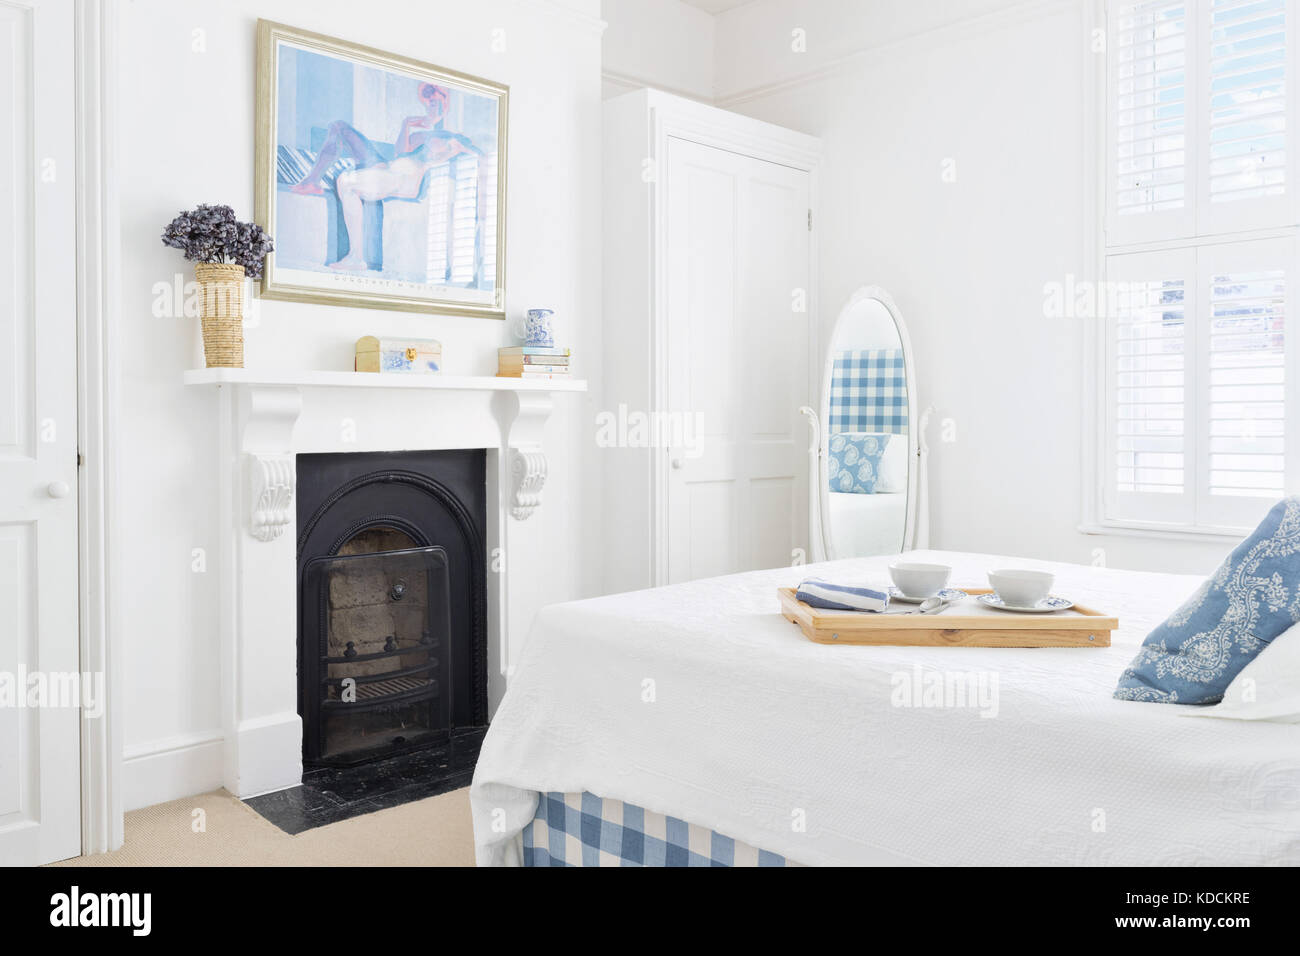 A bright fresh renovated Victorian bedroom showing a shuttered window, a cast iron fireplace and double bed with a breakfast tray placed upon it. Stock Photo